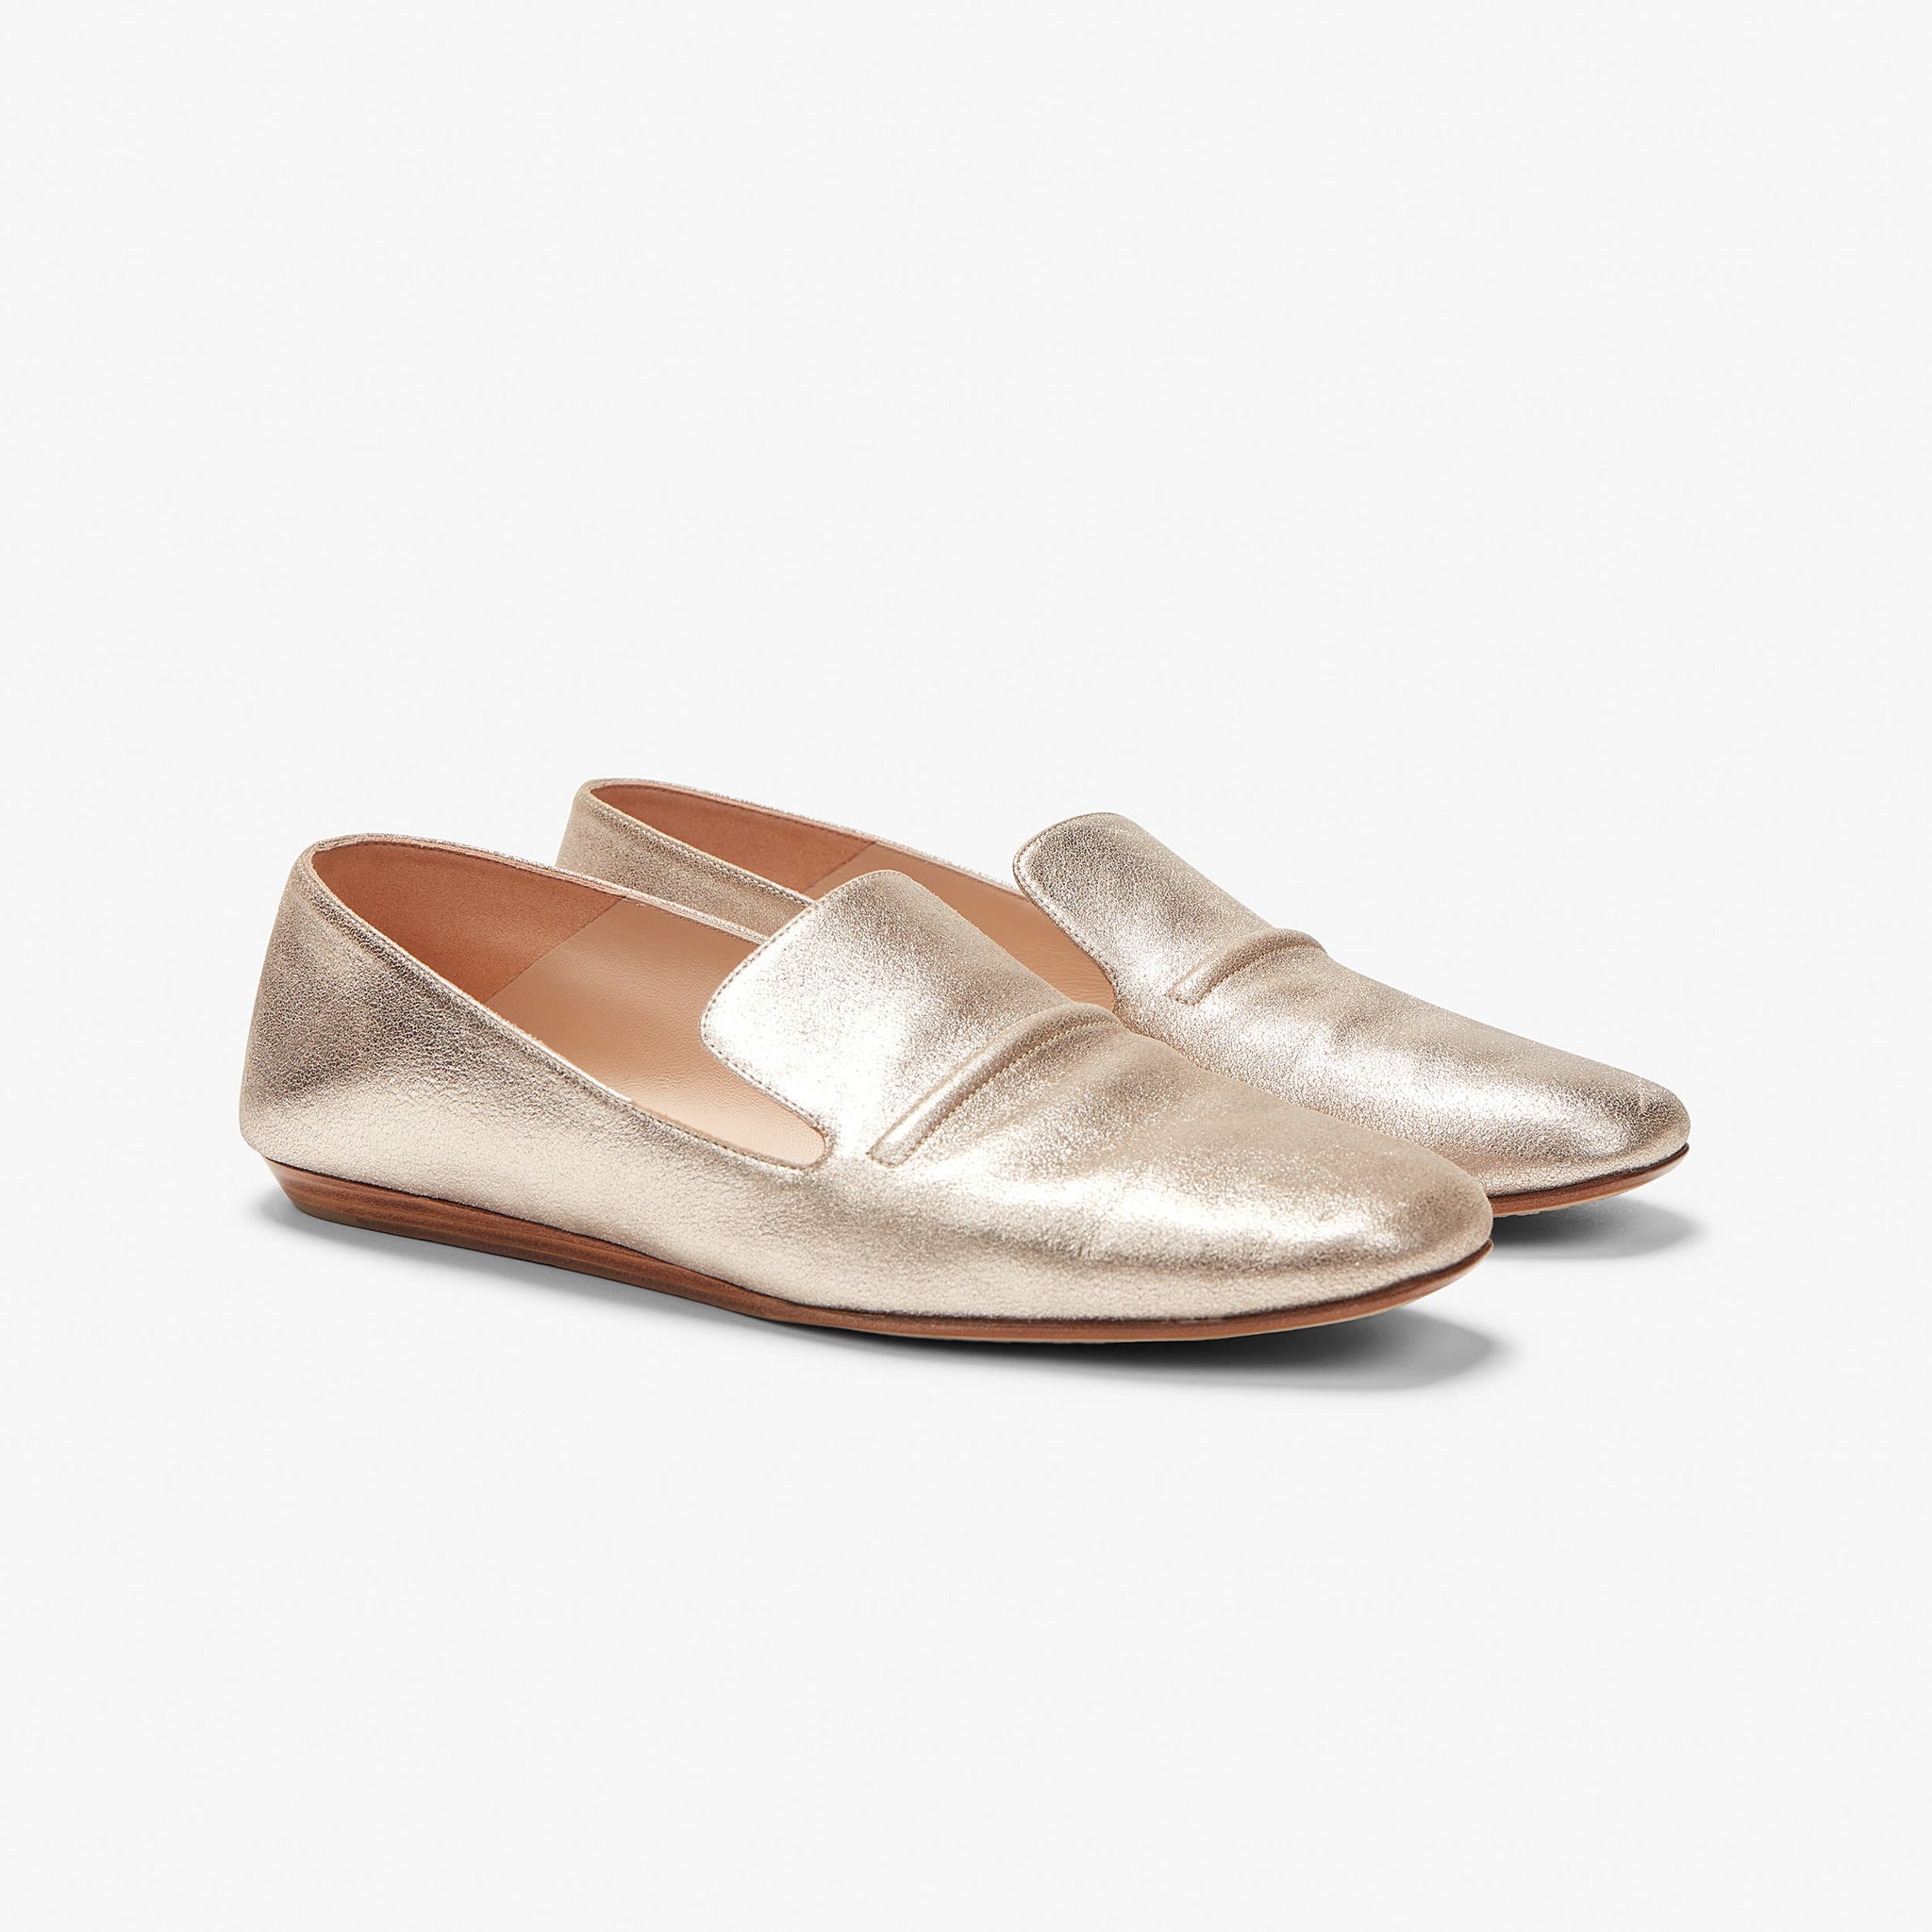 still image of the side and front of the grace loafer in prosecco 